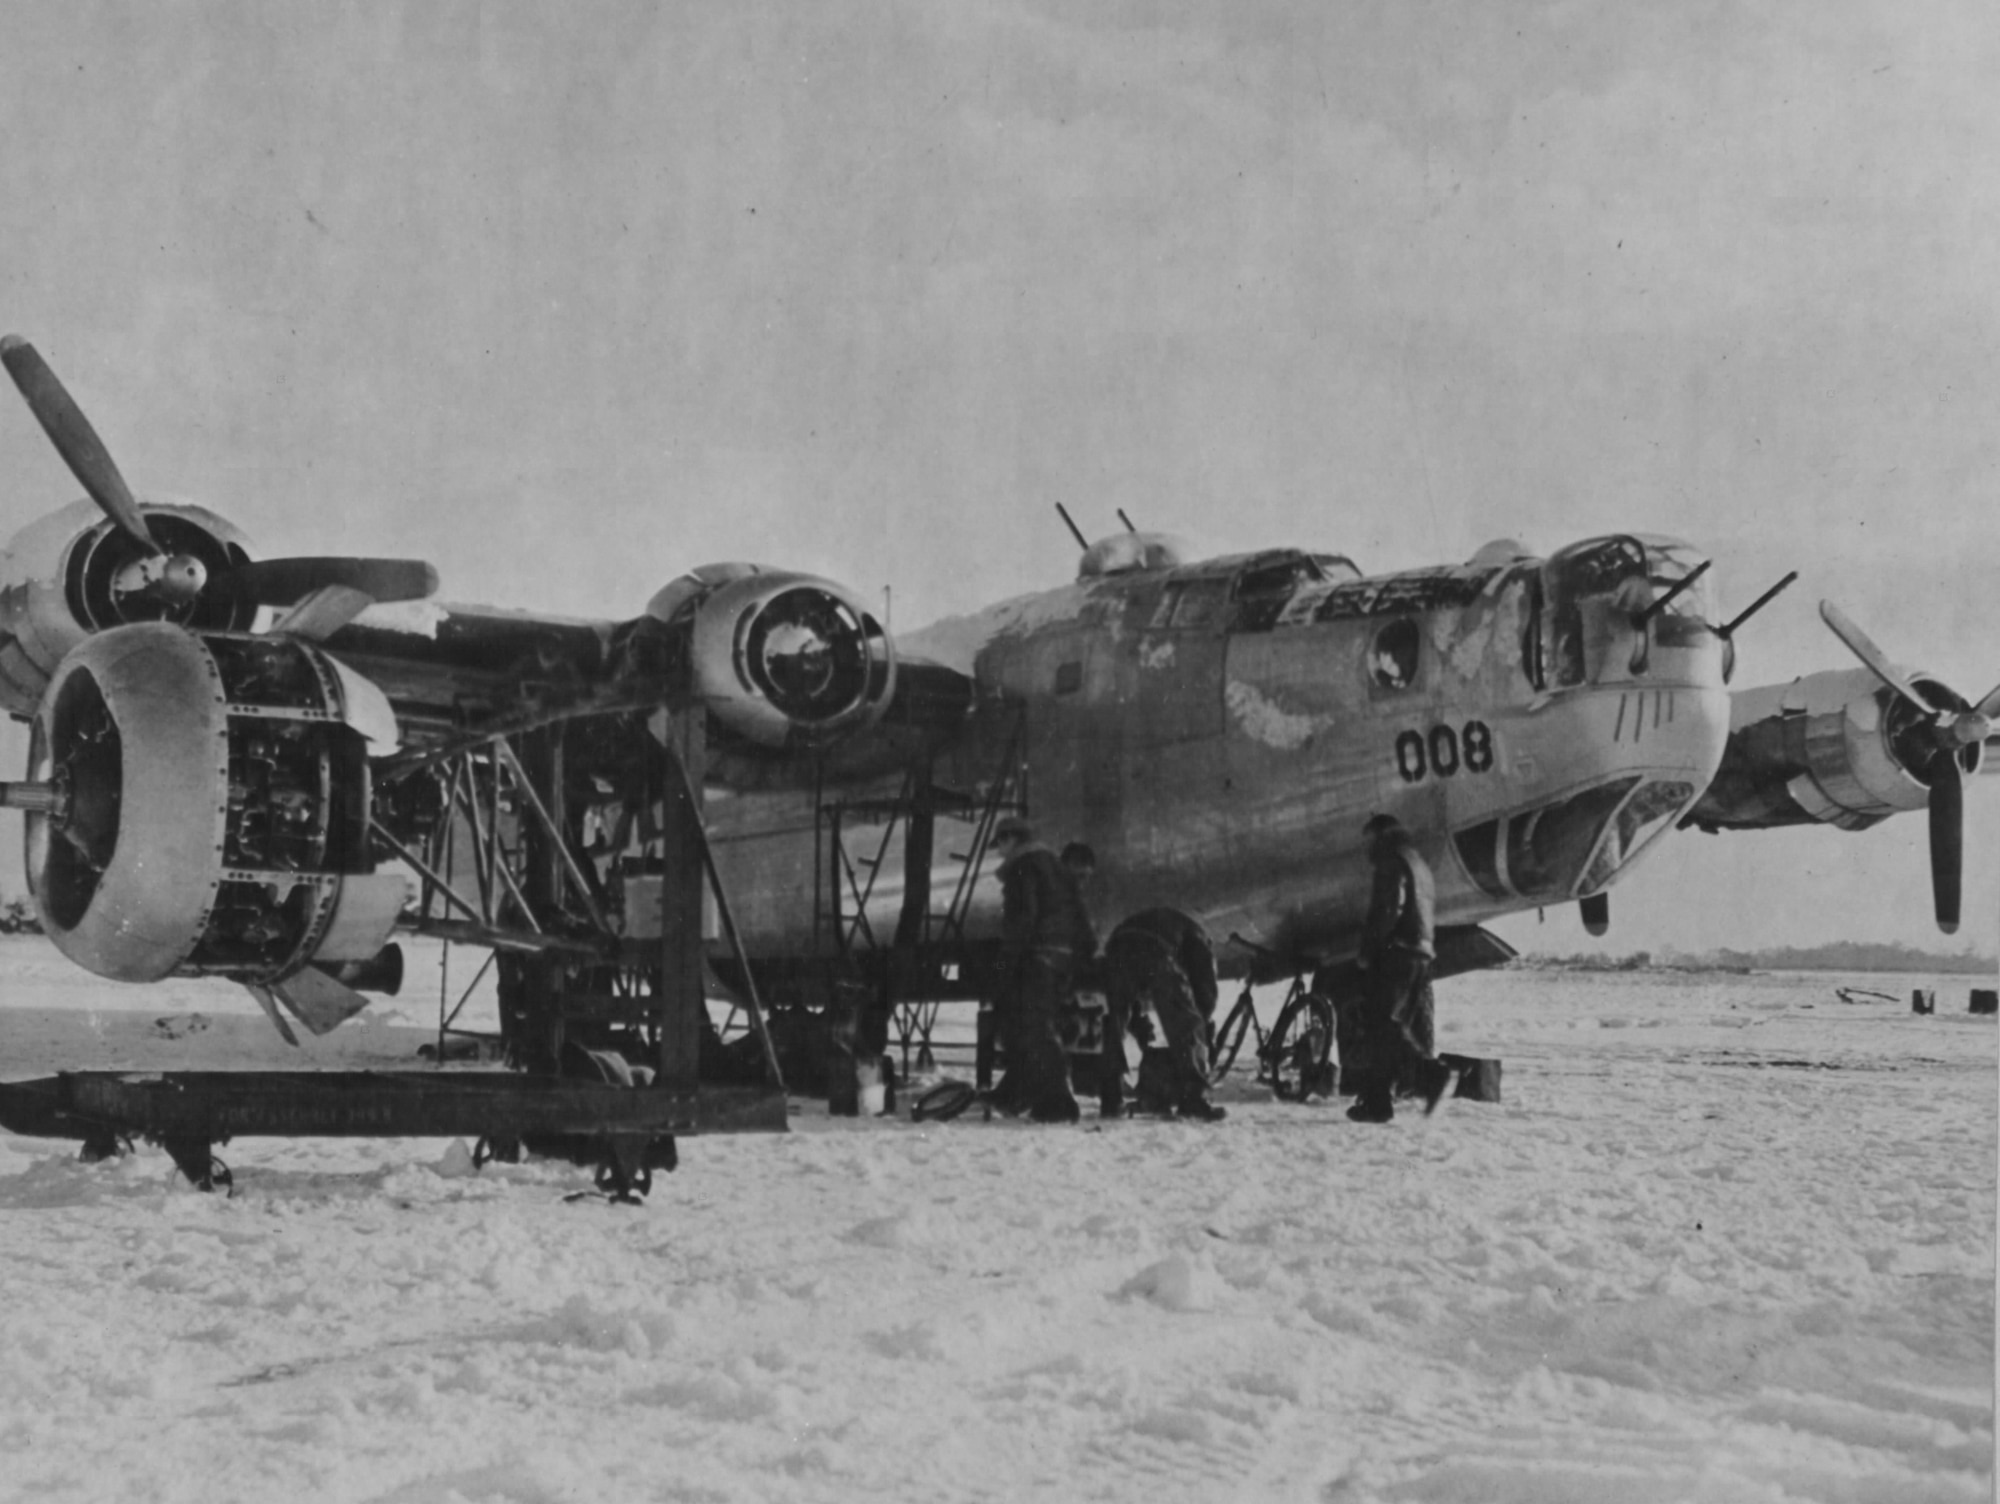 Ground crew changing an engine on a B-24 in the snow at an Eighth Air Force base in England.  Most maintenance was done outdoors regardless of the season or weather.